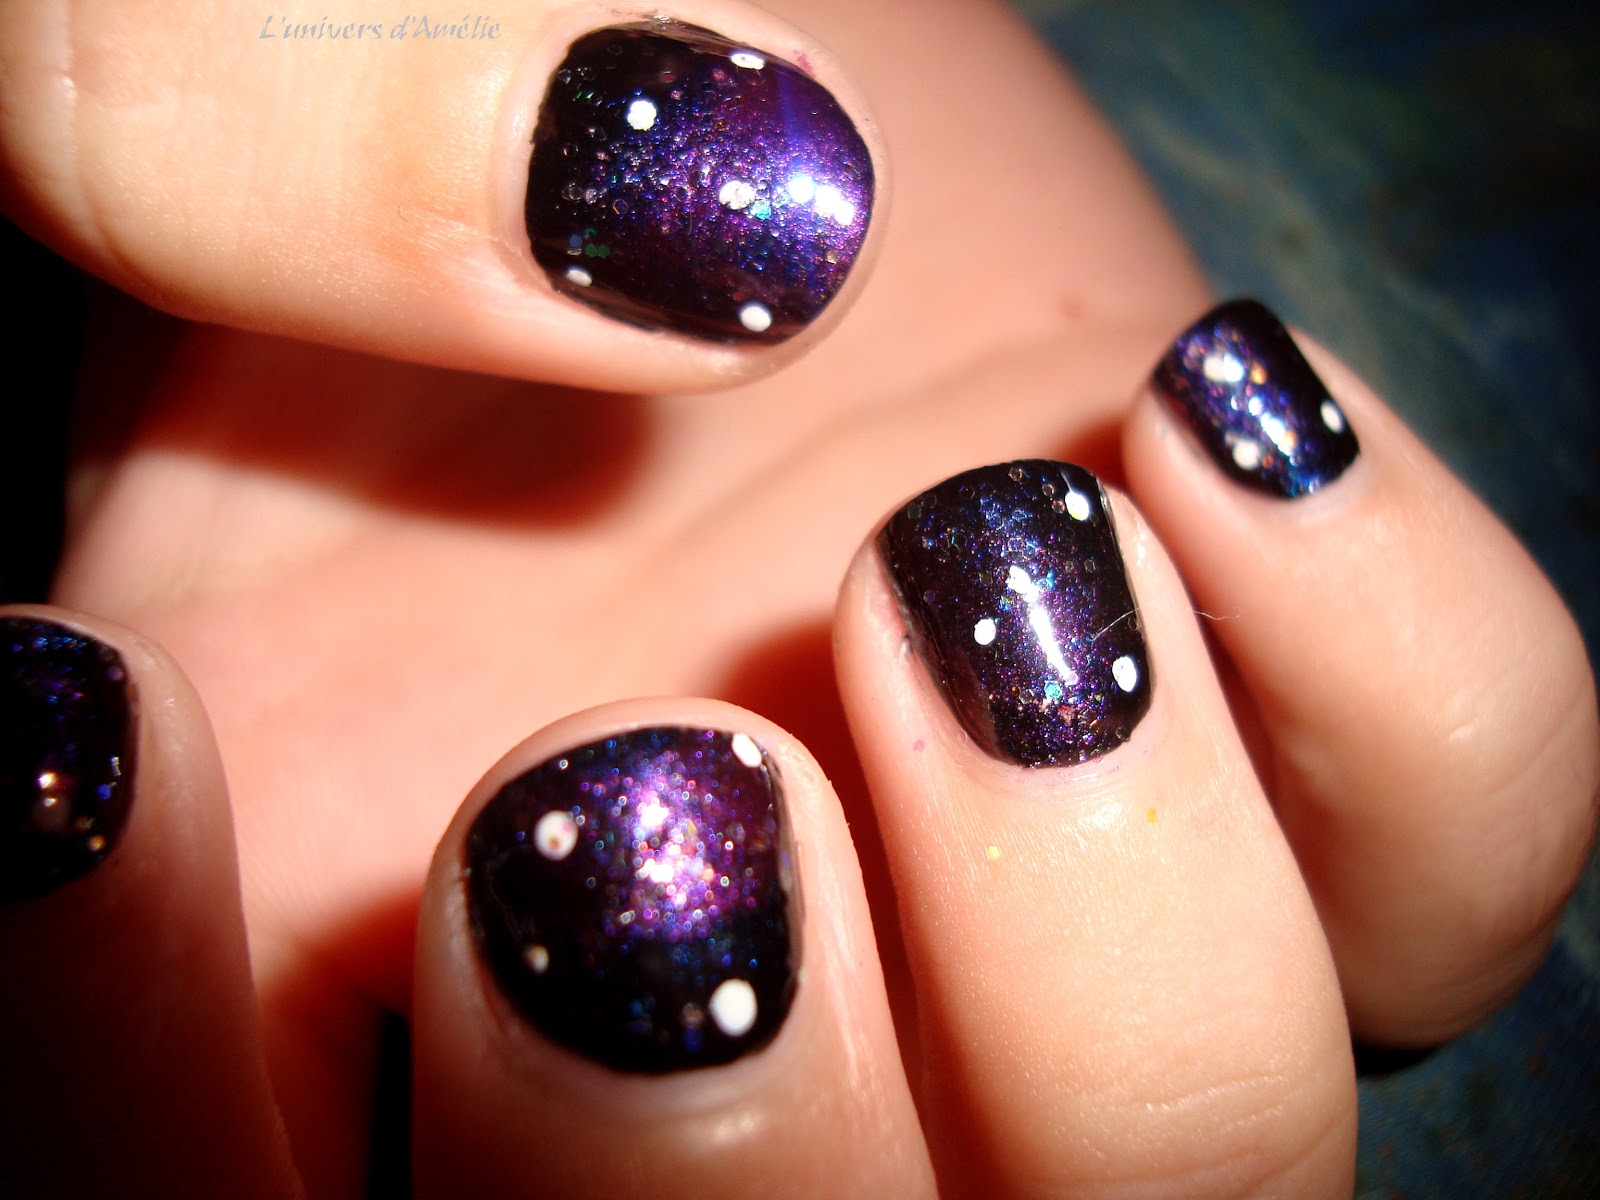 2. How to Create a Stunning Galaxy Nail Art Design - wide 4